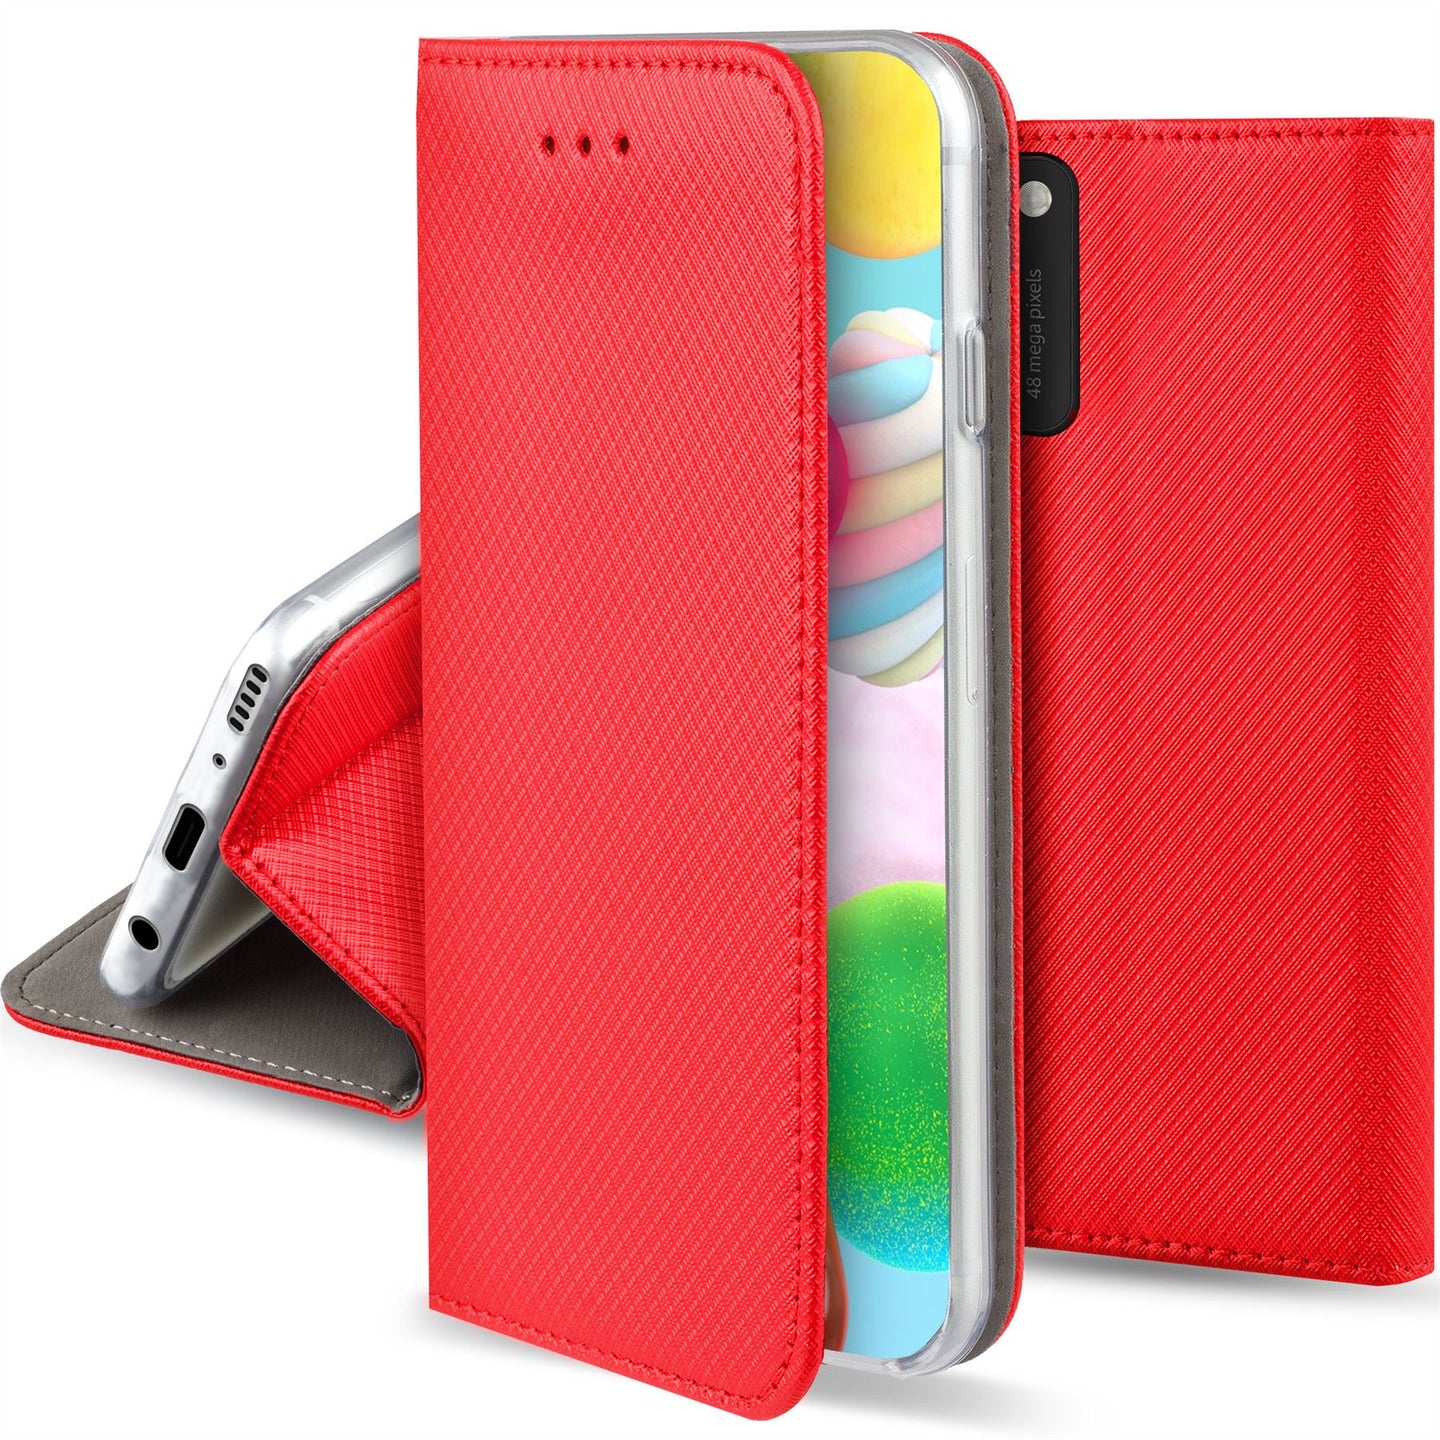 Moozy Case Flip Cover for Samsung A41, Red - Smart Magnetic Flip Case with Card Holder and Stand